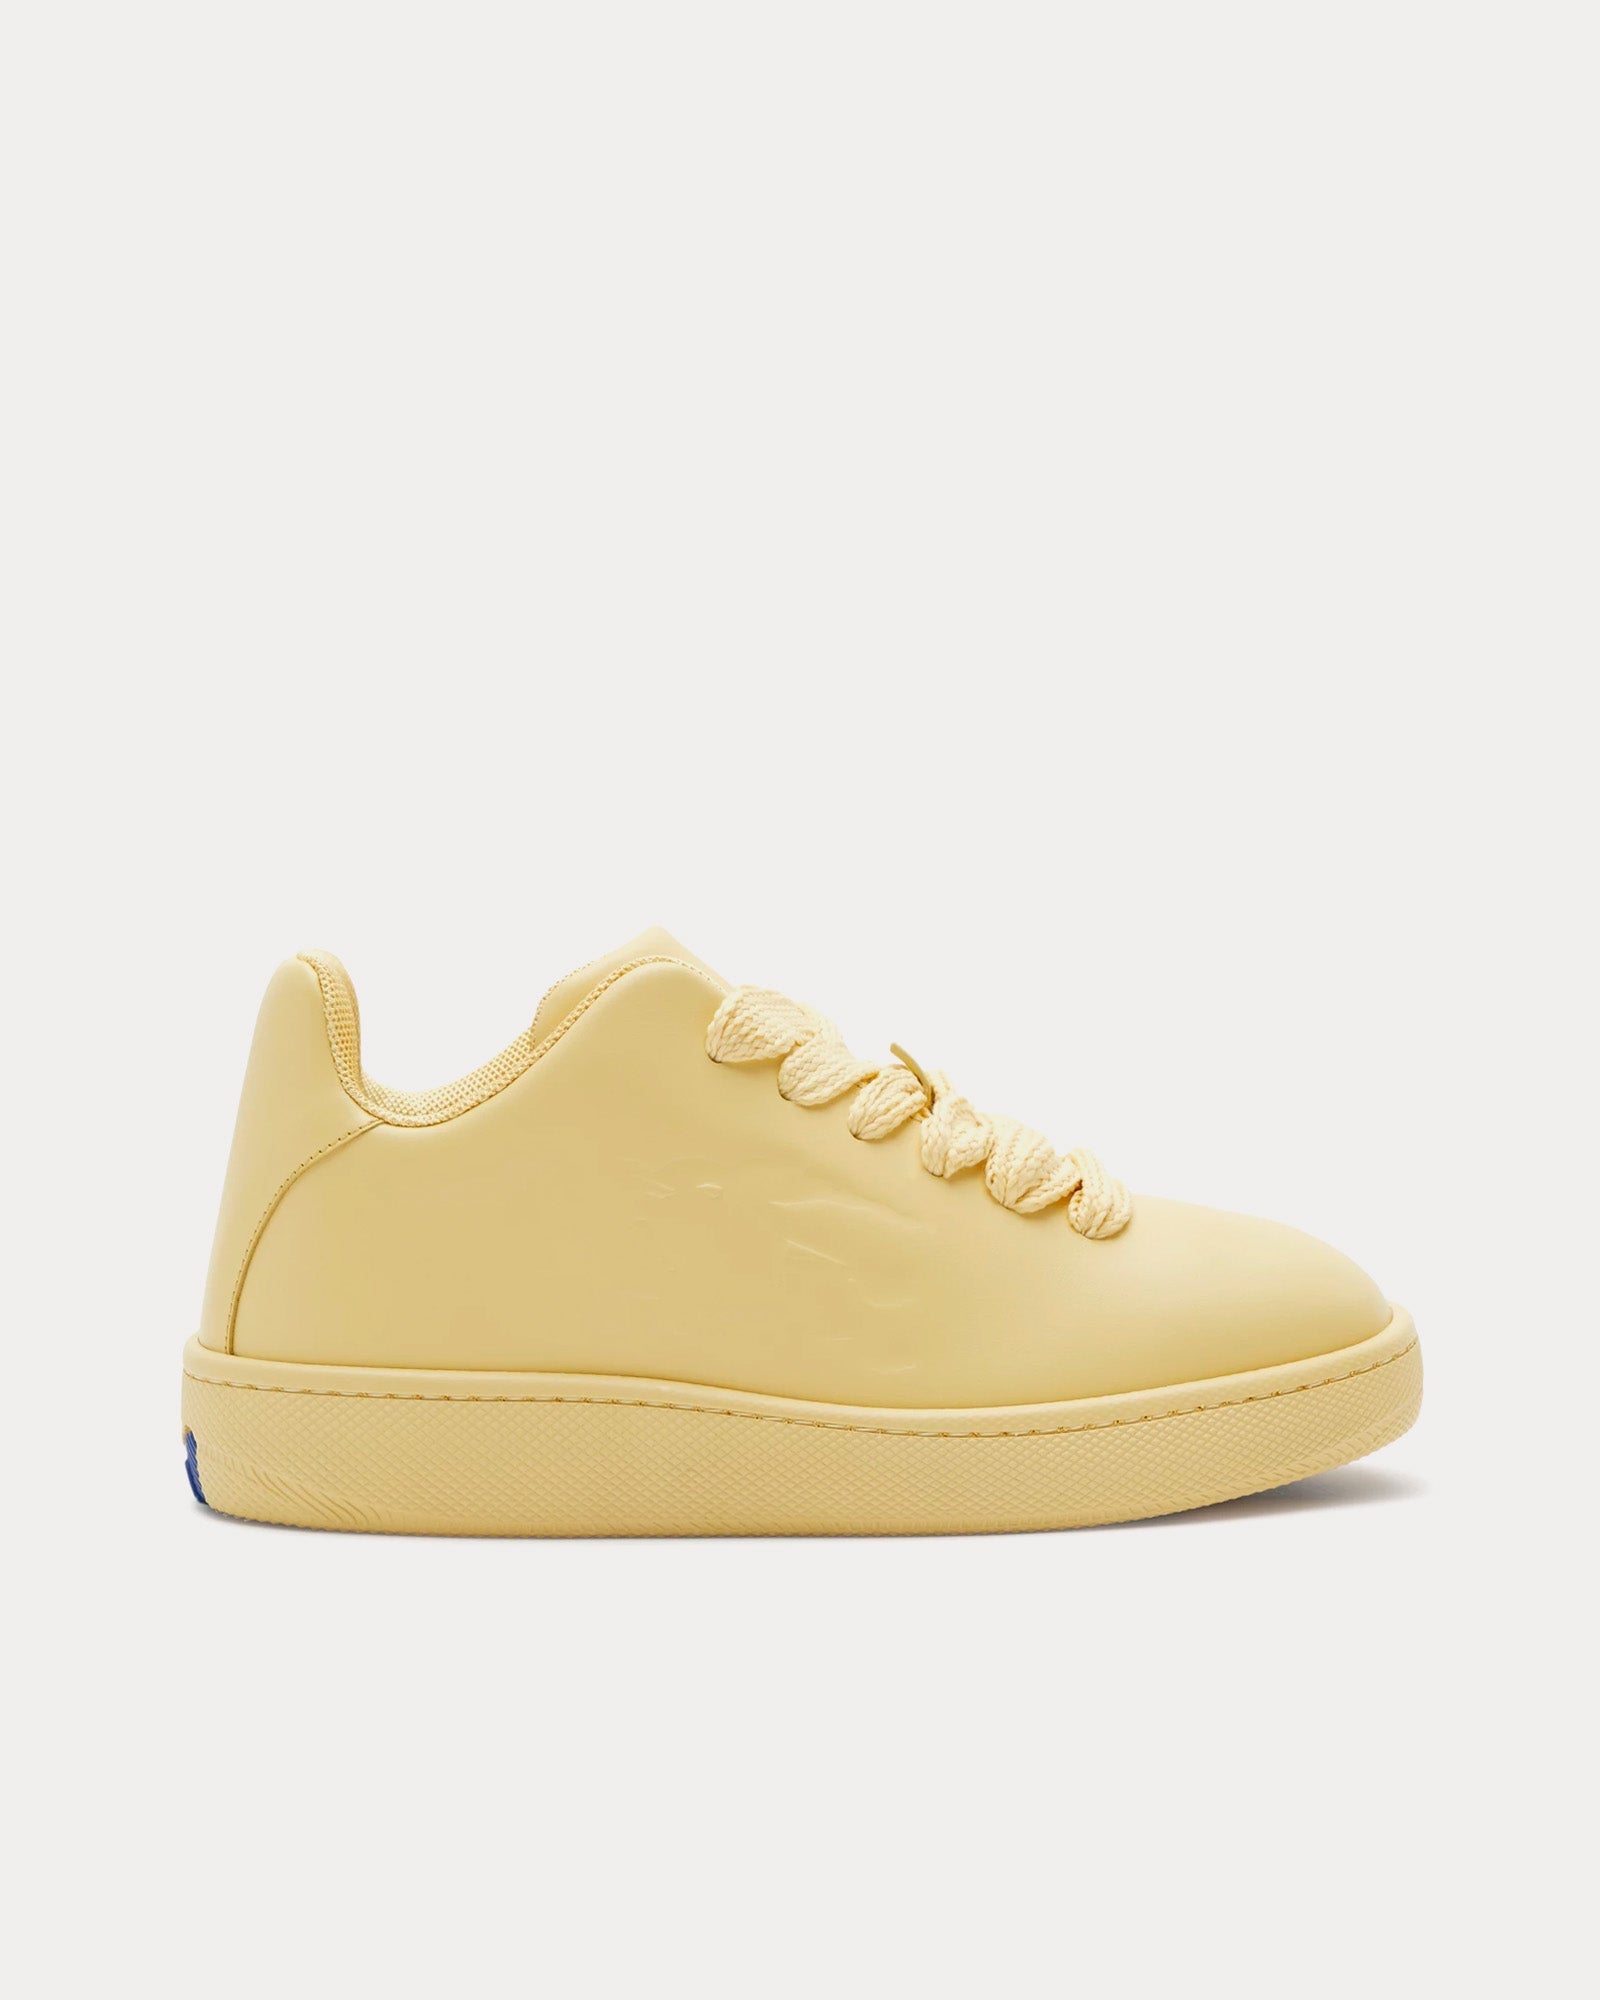 Burberry - Box Leather Daffodil Low Top Sneakers